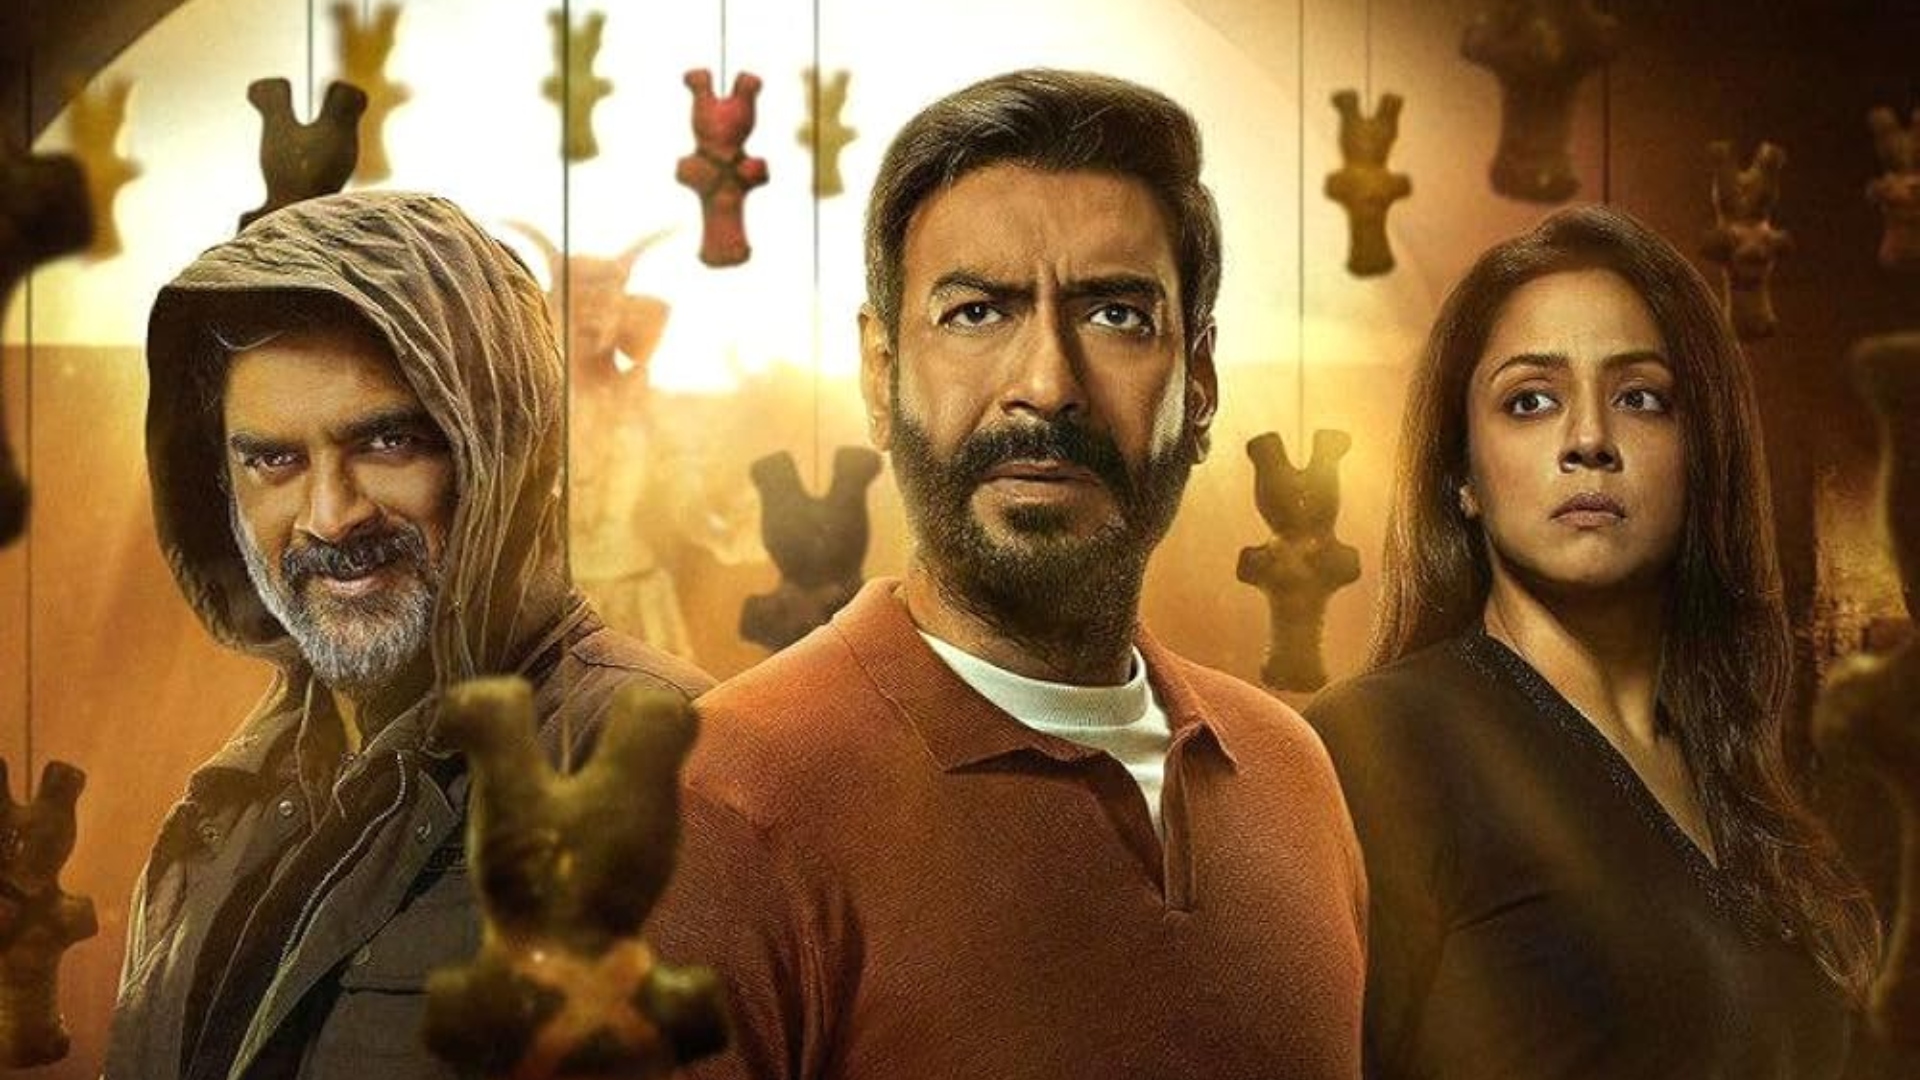 ‘Shaitaan’ box office prediction: Ajay Devgn film to take a double digit opening